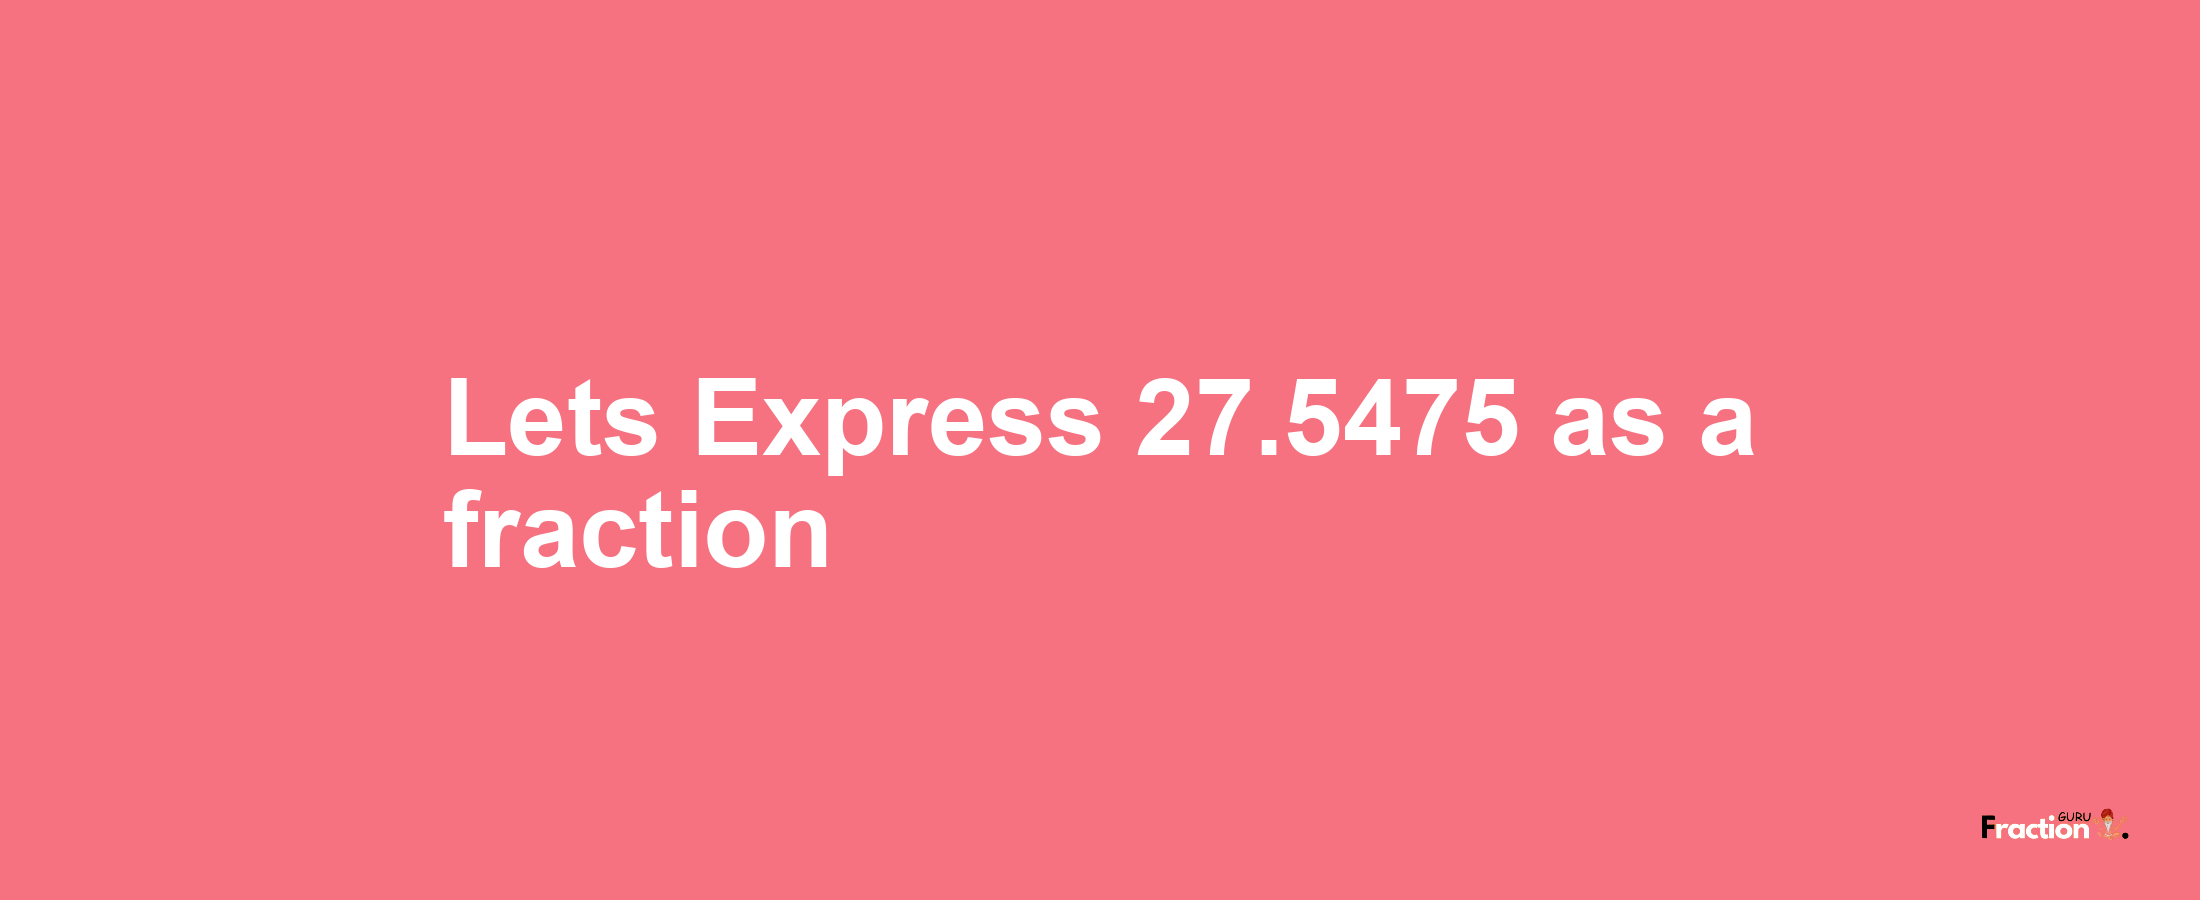 Lets Express 27.5475 as afraction